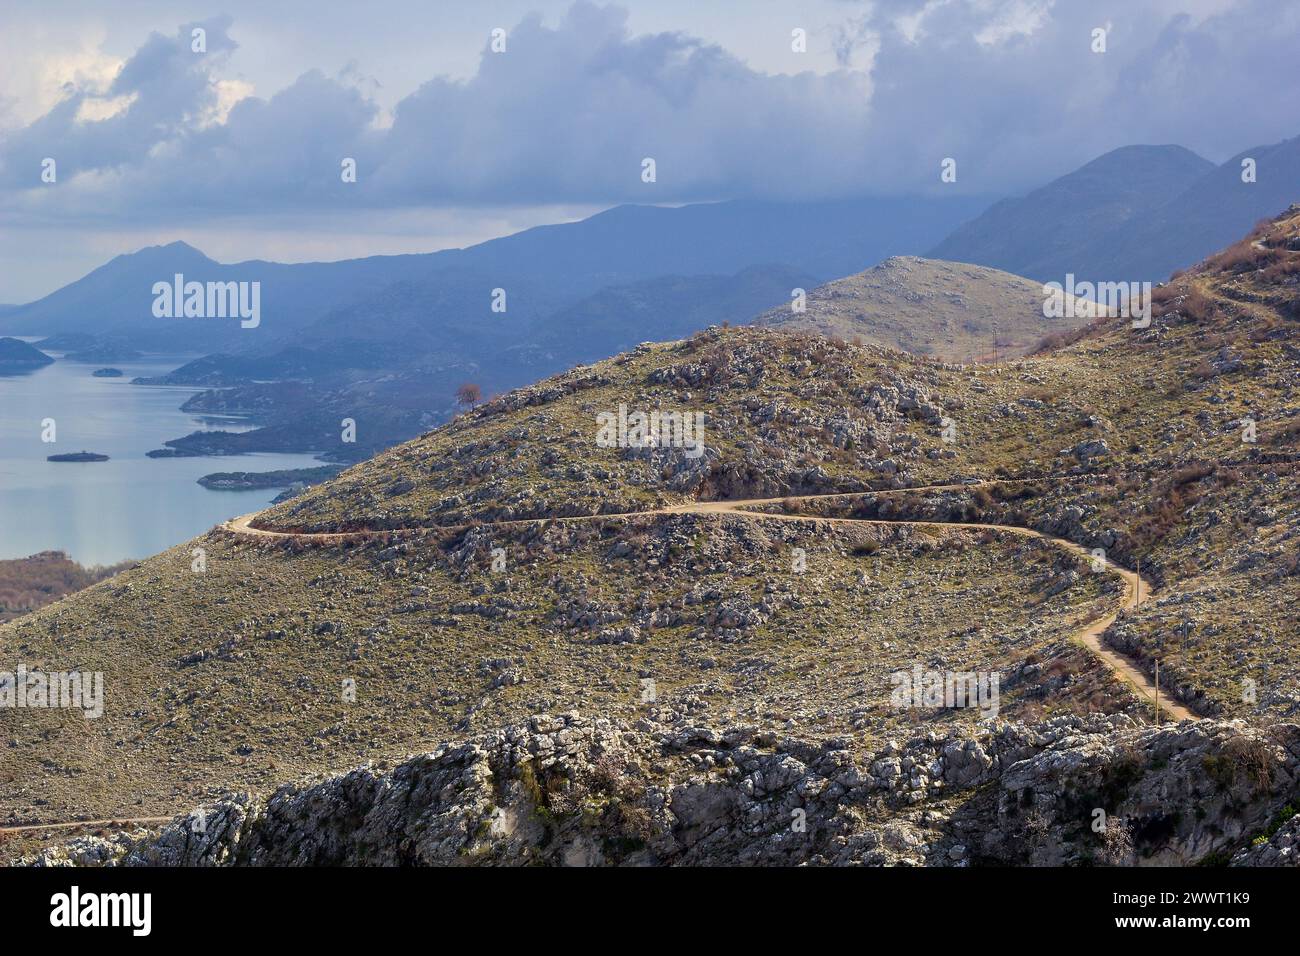 The gravel road on the side of a mountain slope above Lake Skadar, Montenegro. Panoramic road no. 3 Virpazar - Ulcinj near Donji Murici. Stock Photo